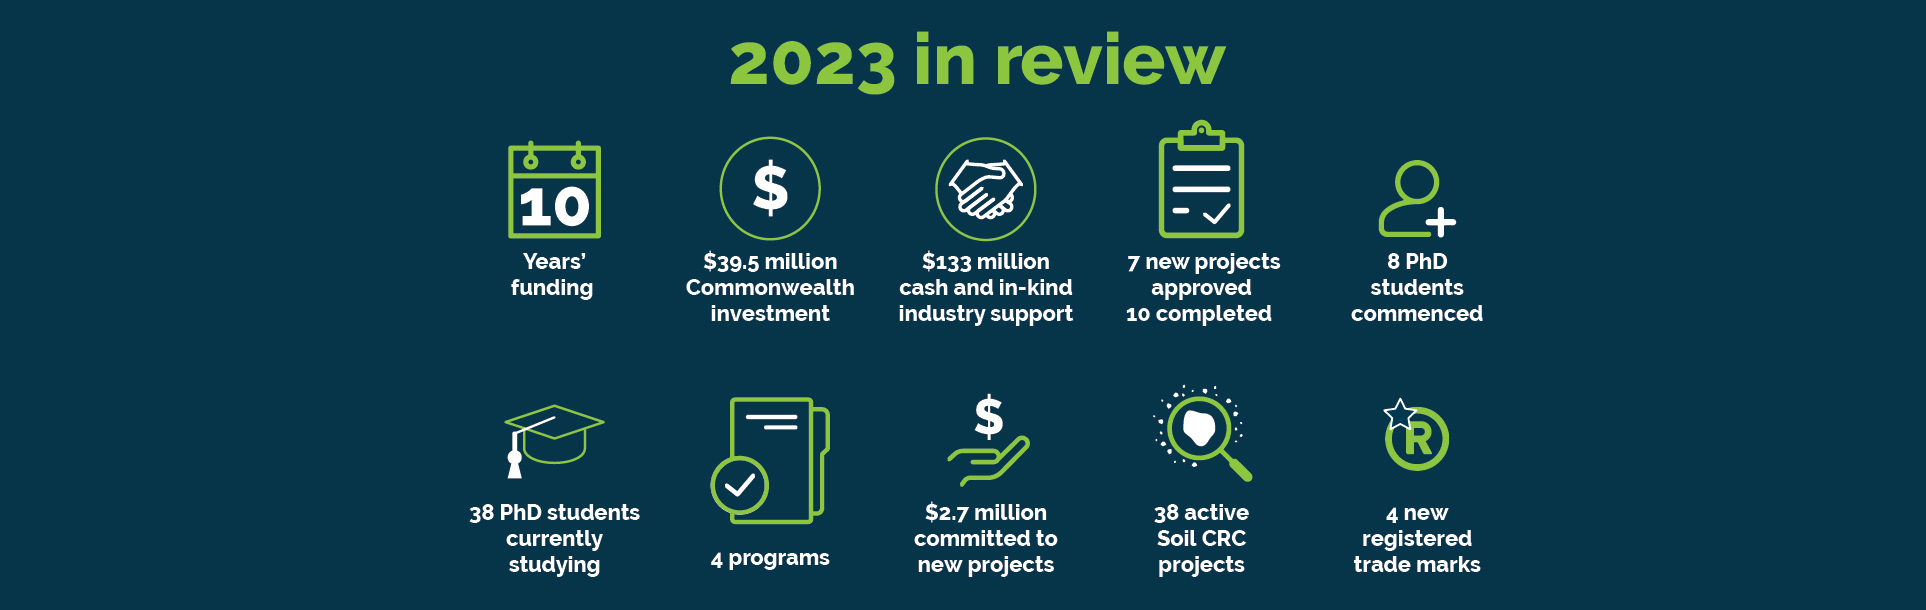 2023-in-review-graphic